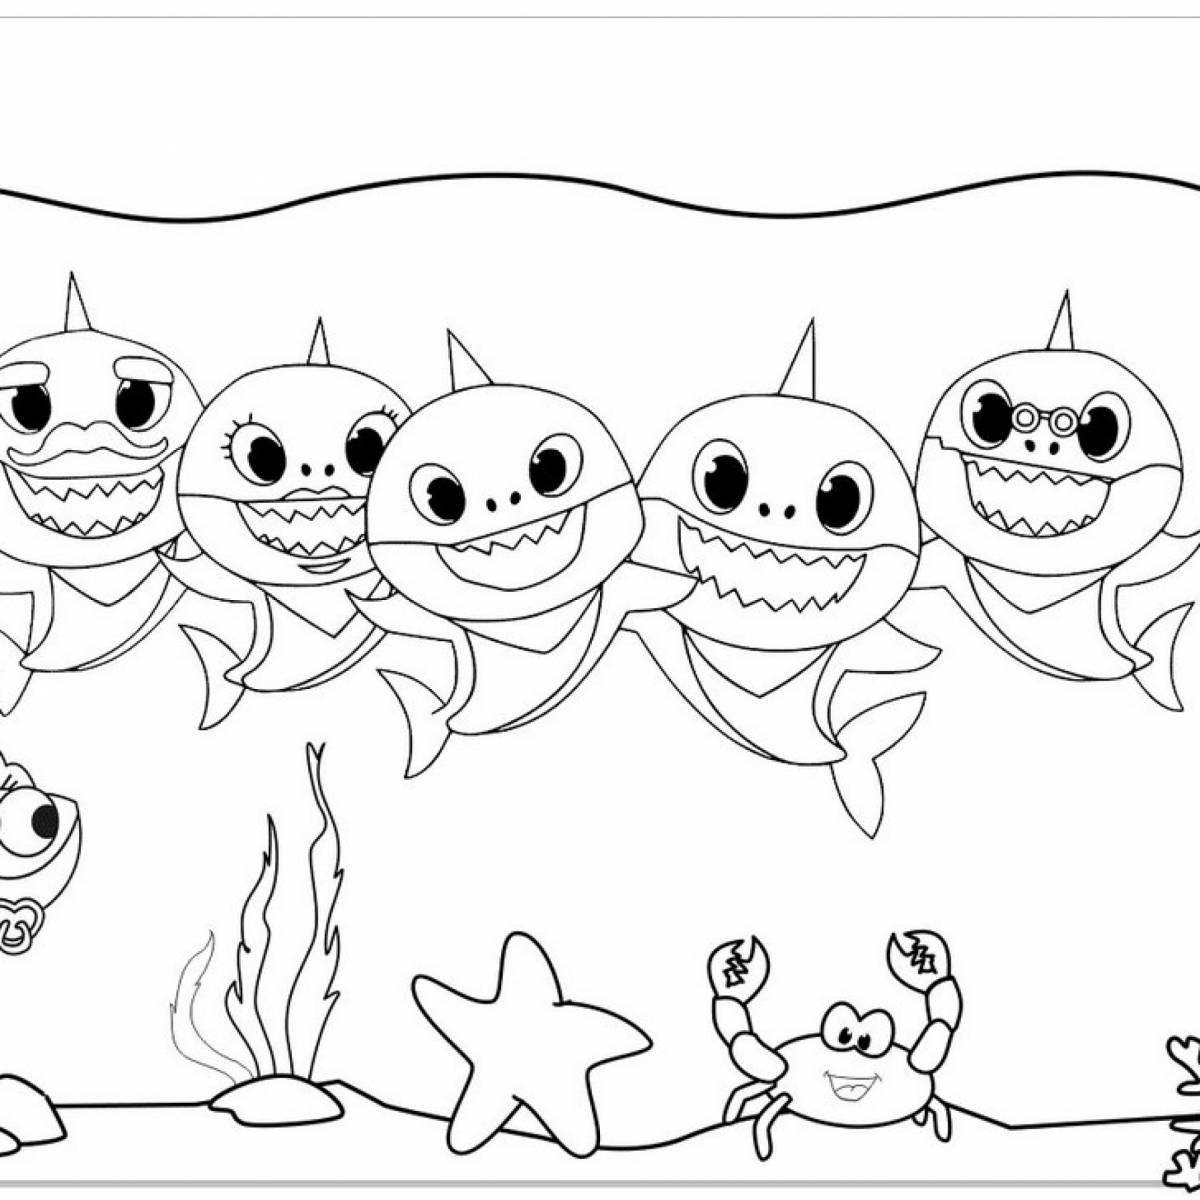 Coloring book for kids sharks